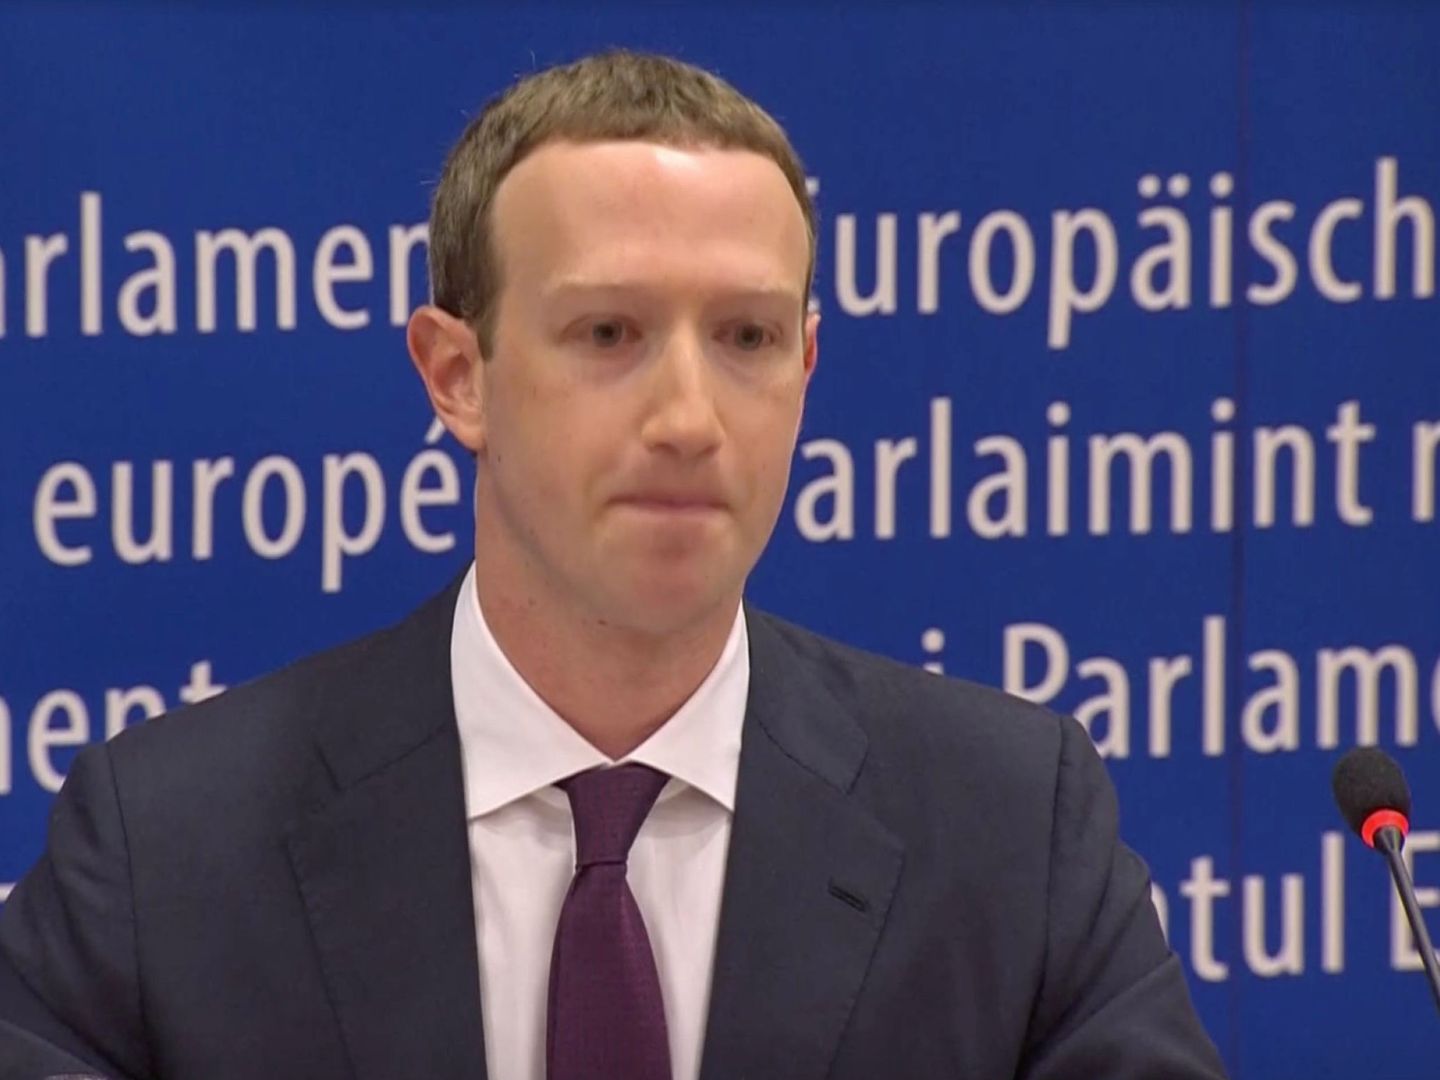 Facebook's CEO Mark Zuckerberg answers questions about the improper use of millions of users' data by a political consultancy, at the European Parliament in Brussels, Belgium, in this still image taken from Reuters TV May 22, 2018. REUTERS ReutersTV